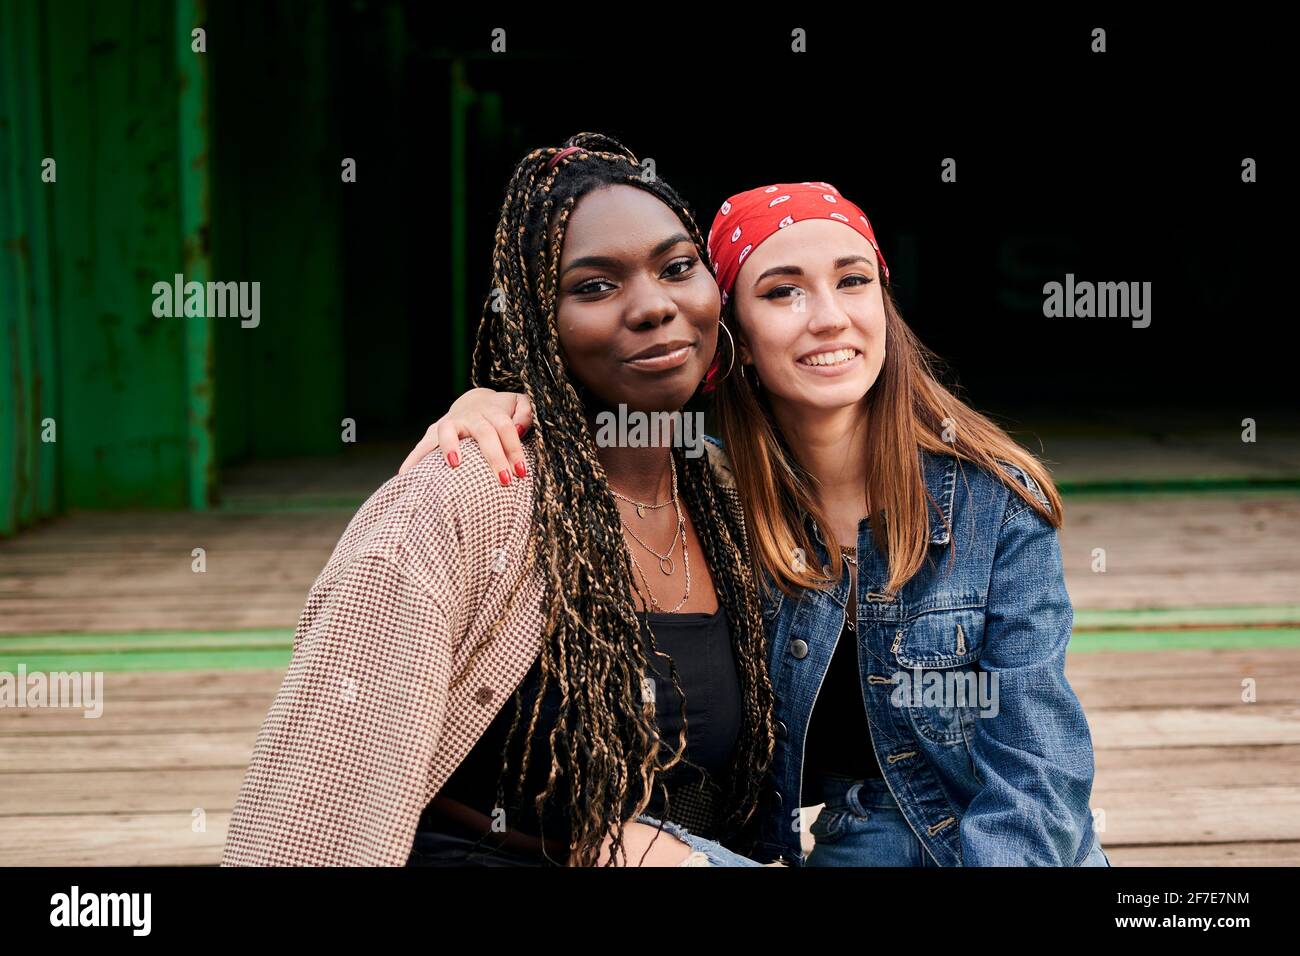 Portrait of two young multi-ethnic women in urban clothing smiling Stock Photo